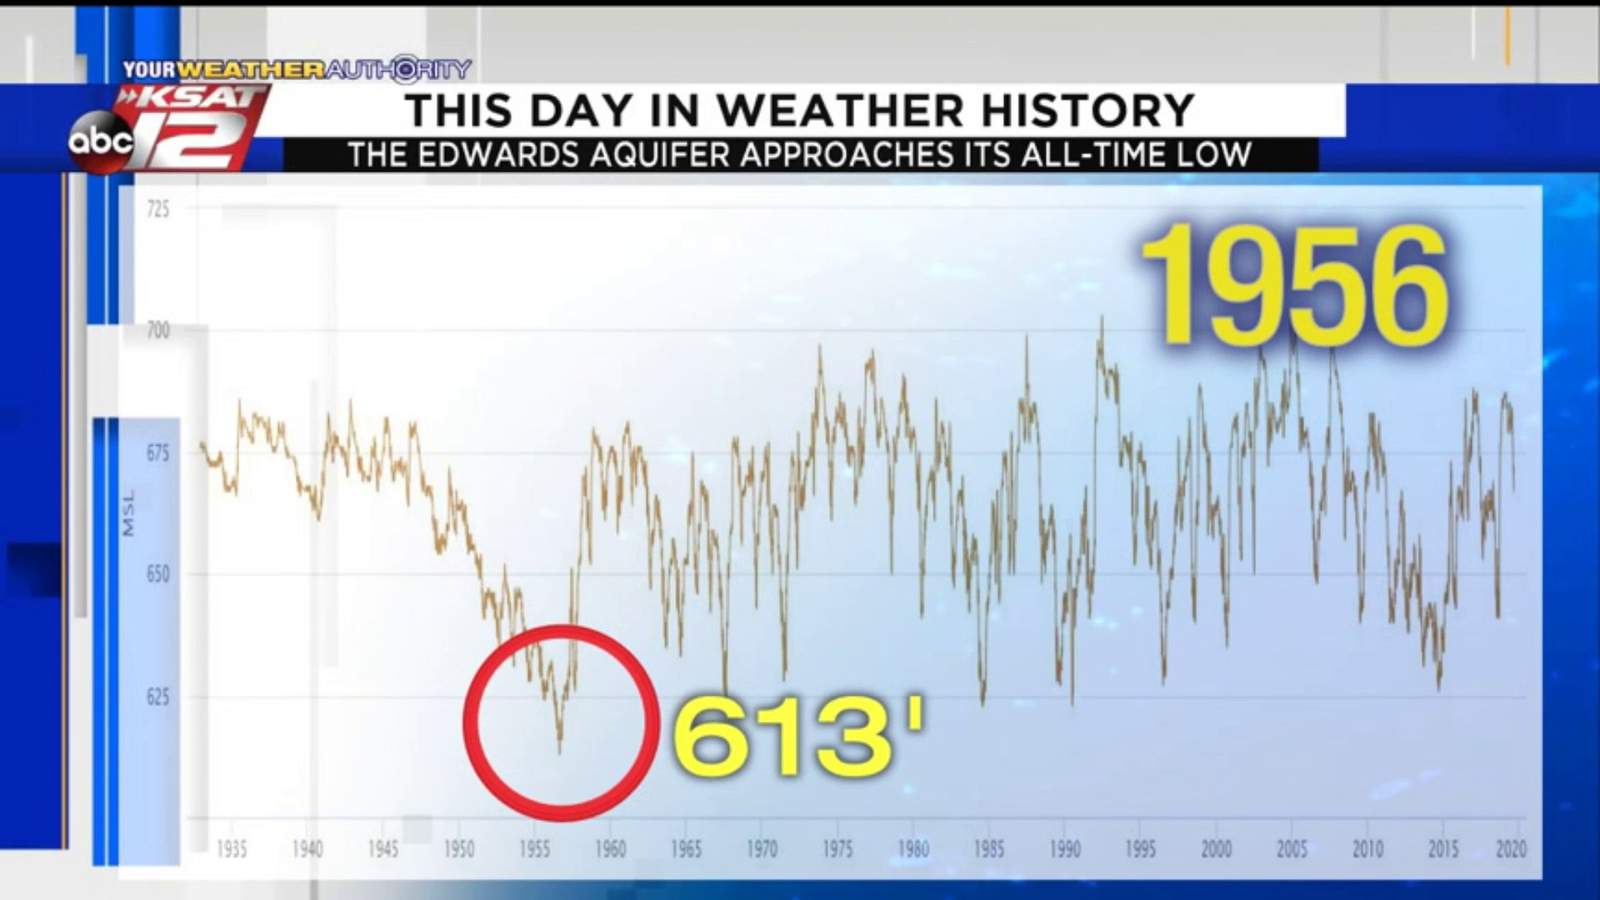 This Day in Weather History: August 17th